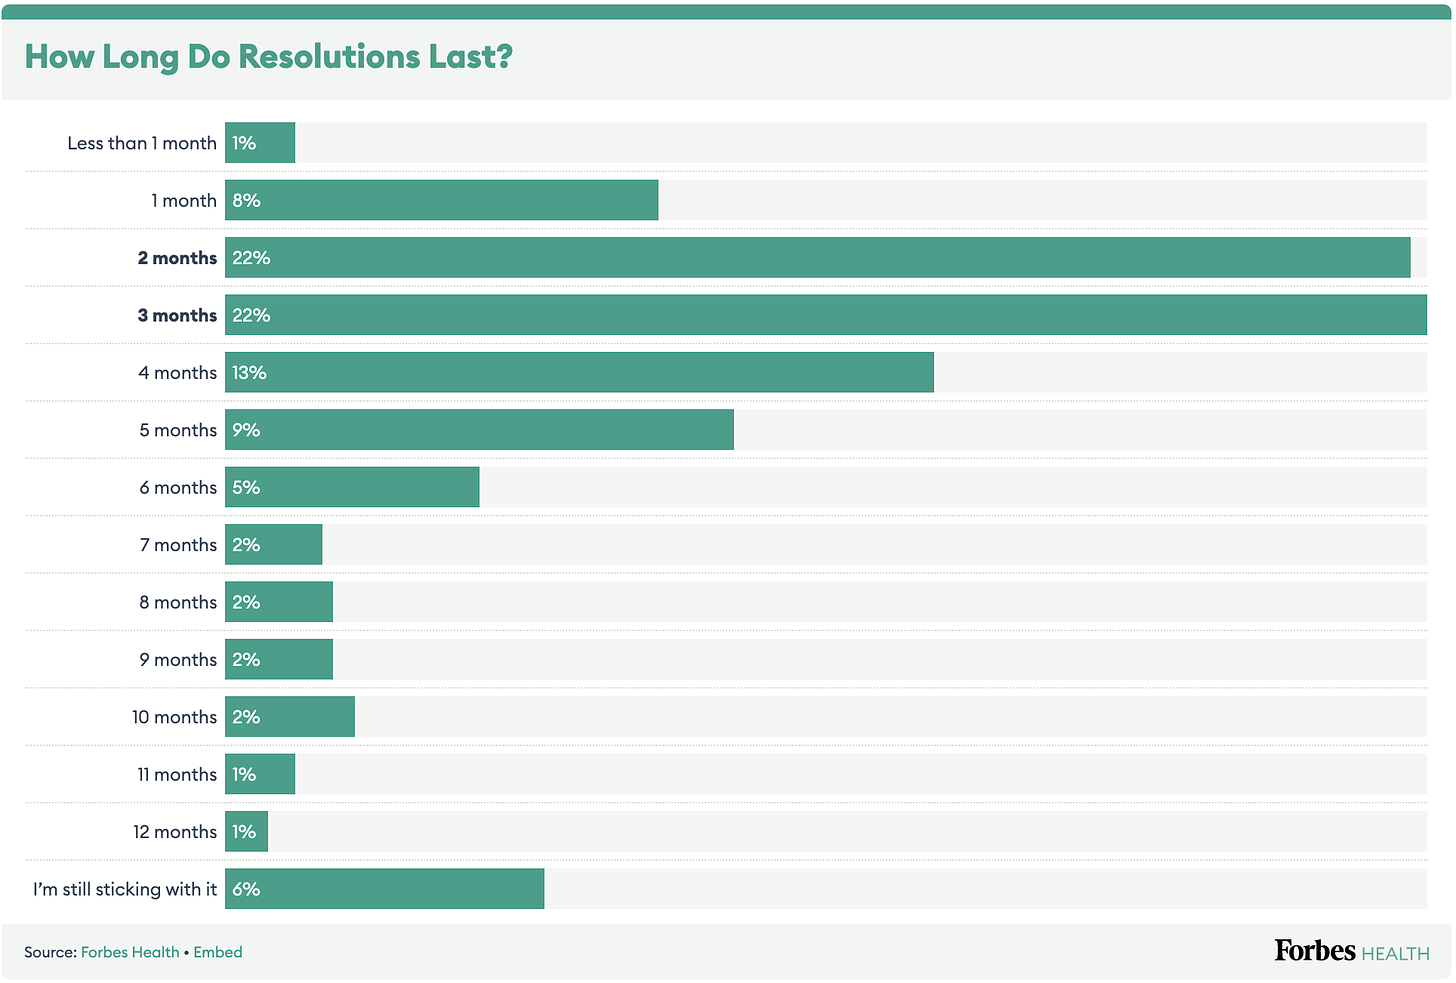 Bar graph showing how long resolutions typically last. 44% of responders state 2-3 months.